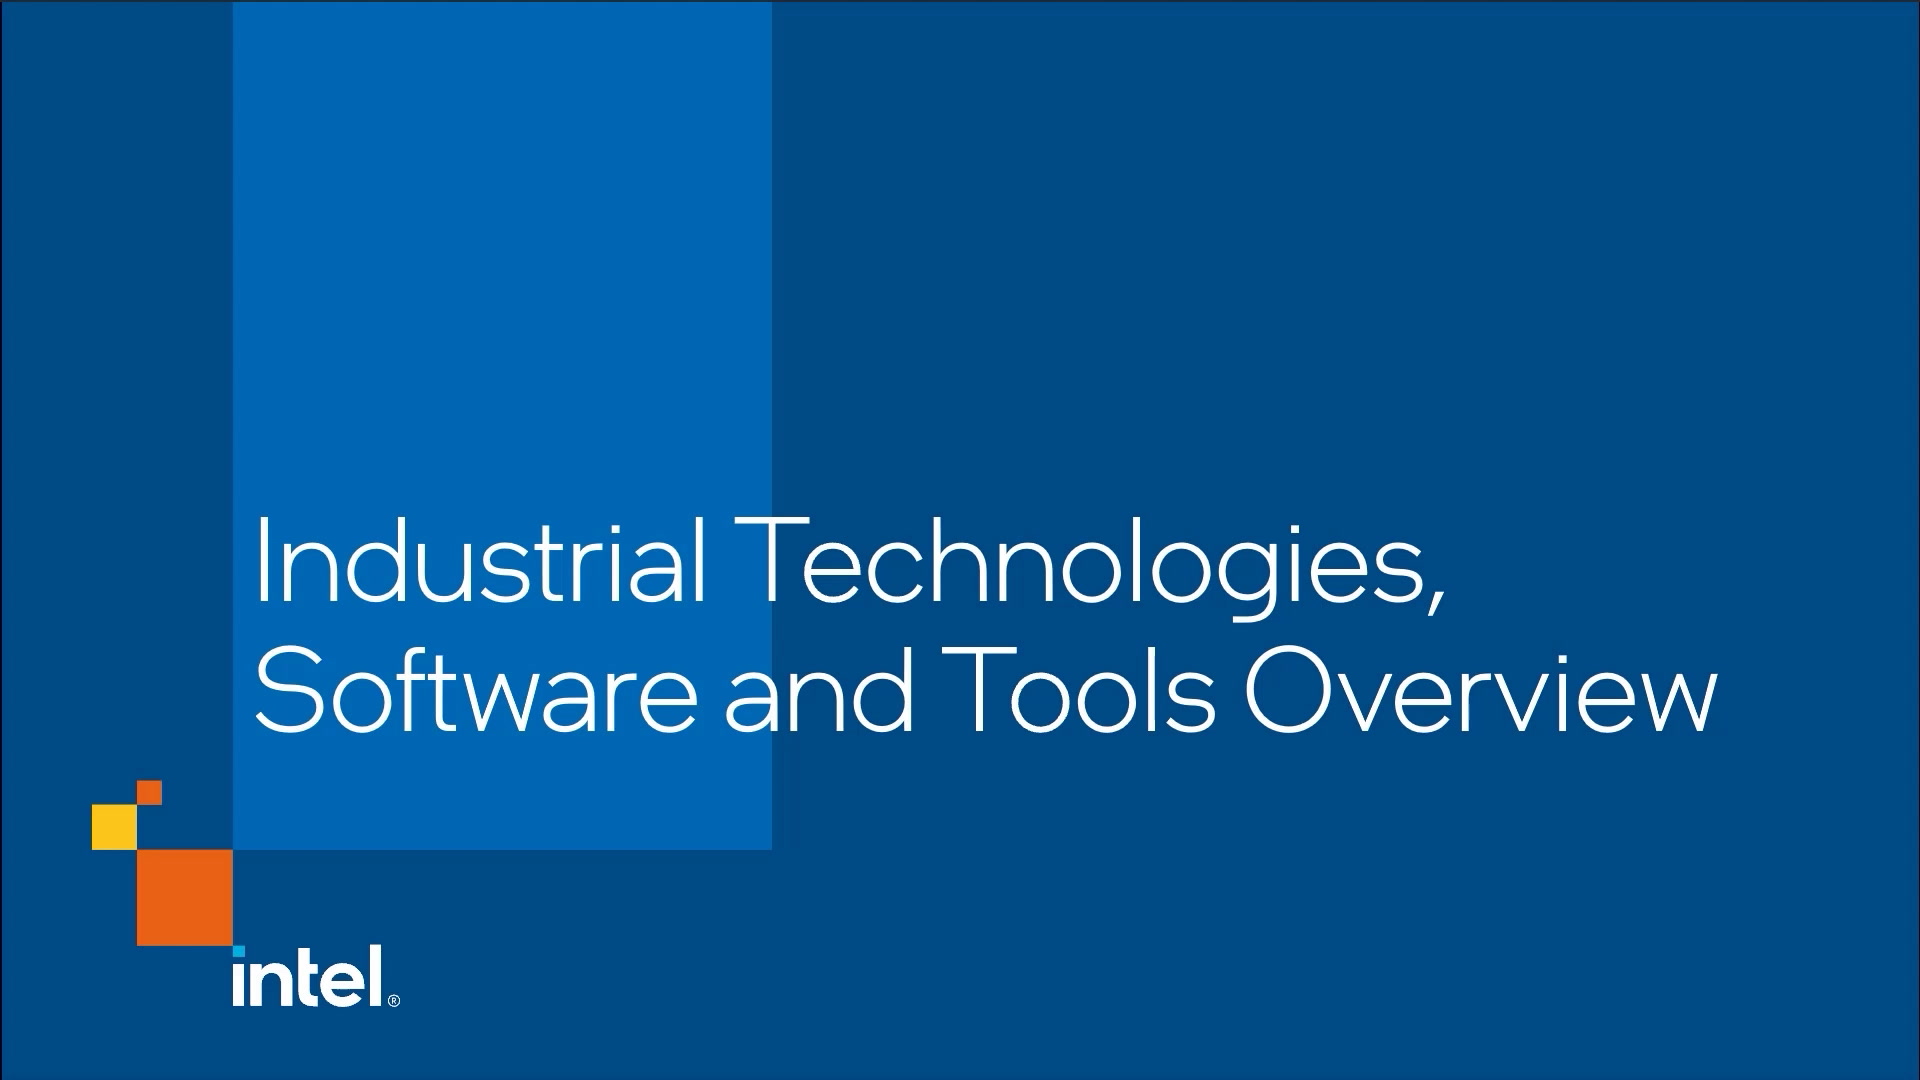 Chapter 1: Industrial Technologies, Software and Tools Overview